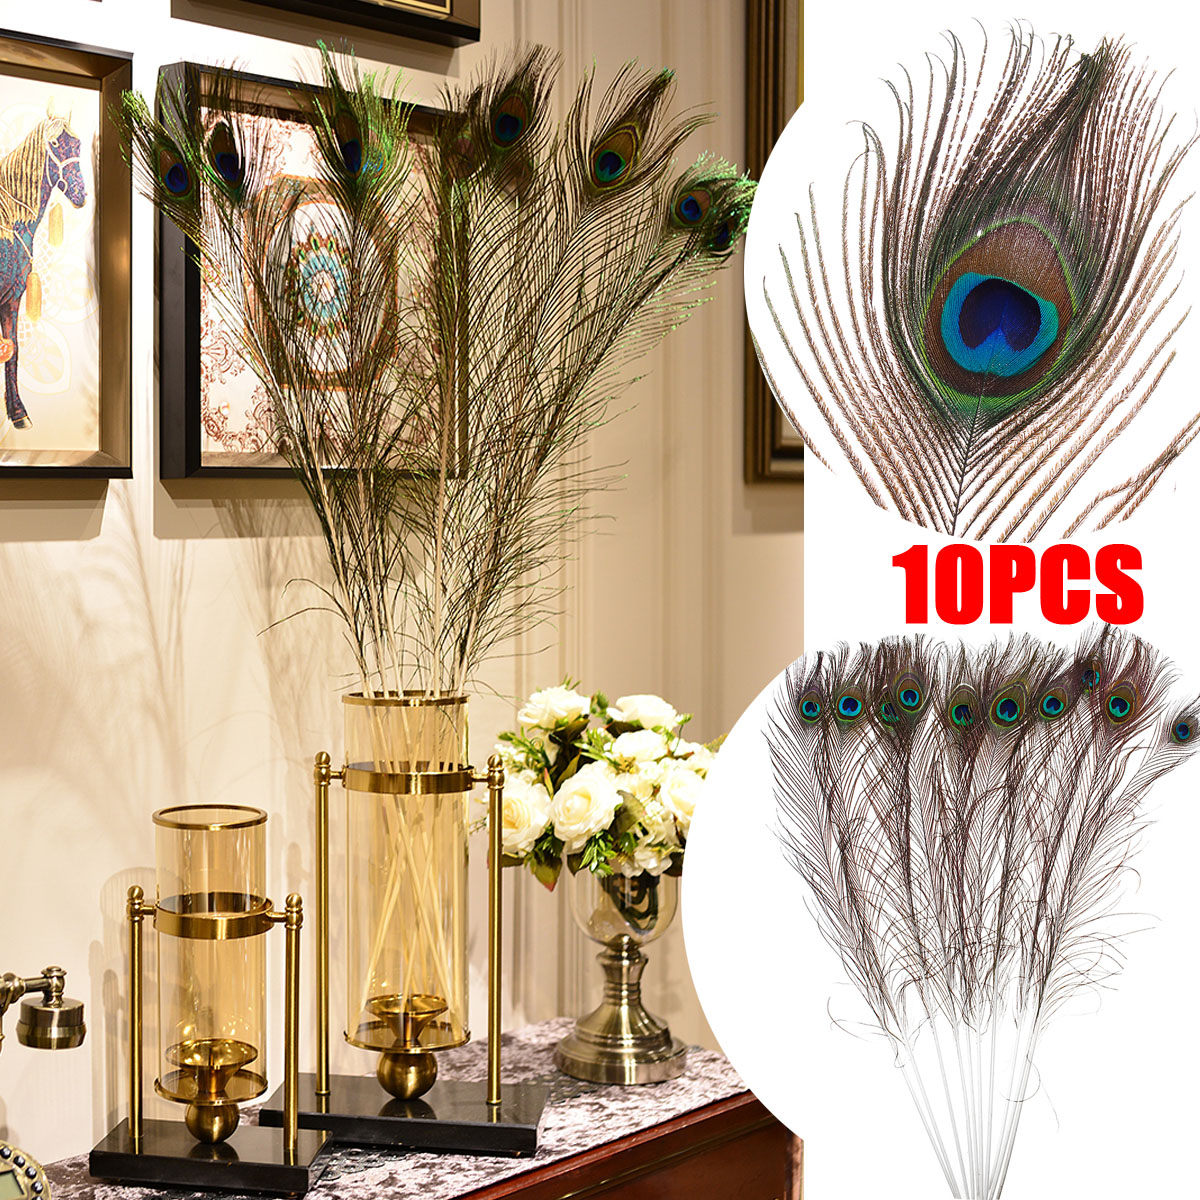 10Pcs/set Natural Peacock Tail Feathers Wedding Festival Party Home Decoration 